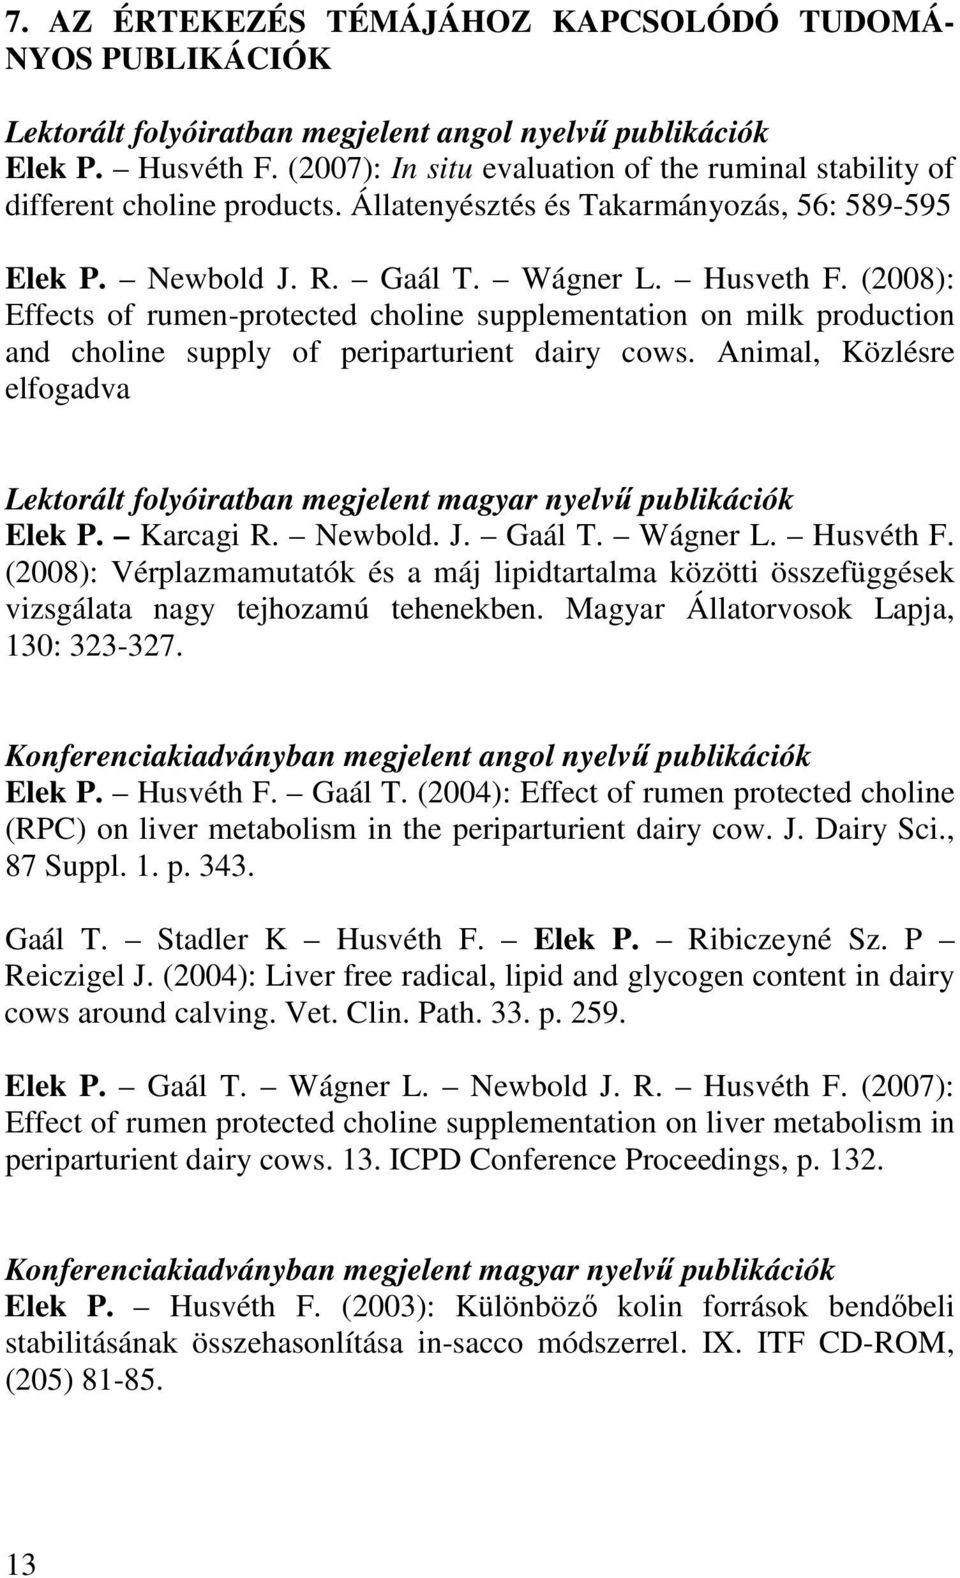 (2008): Effects of rumen-protected choline supplementation on milk production and choline supply of periparturient dairy cows.